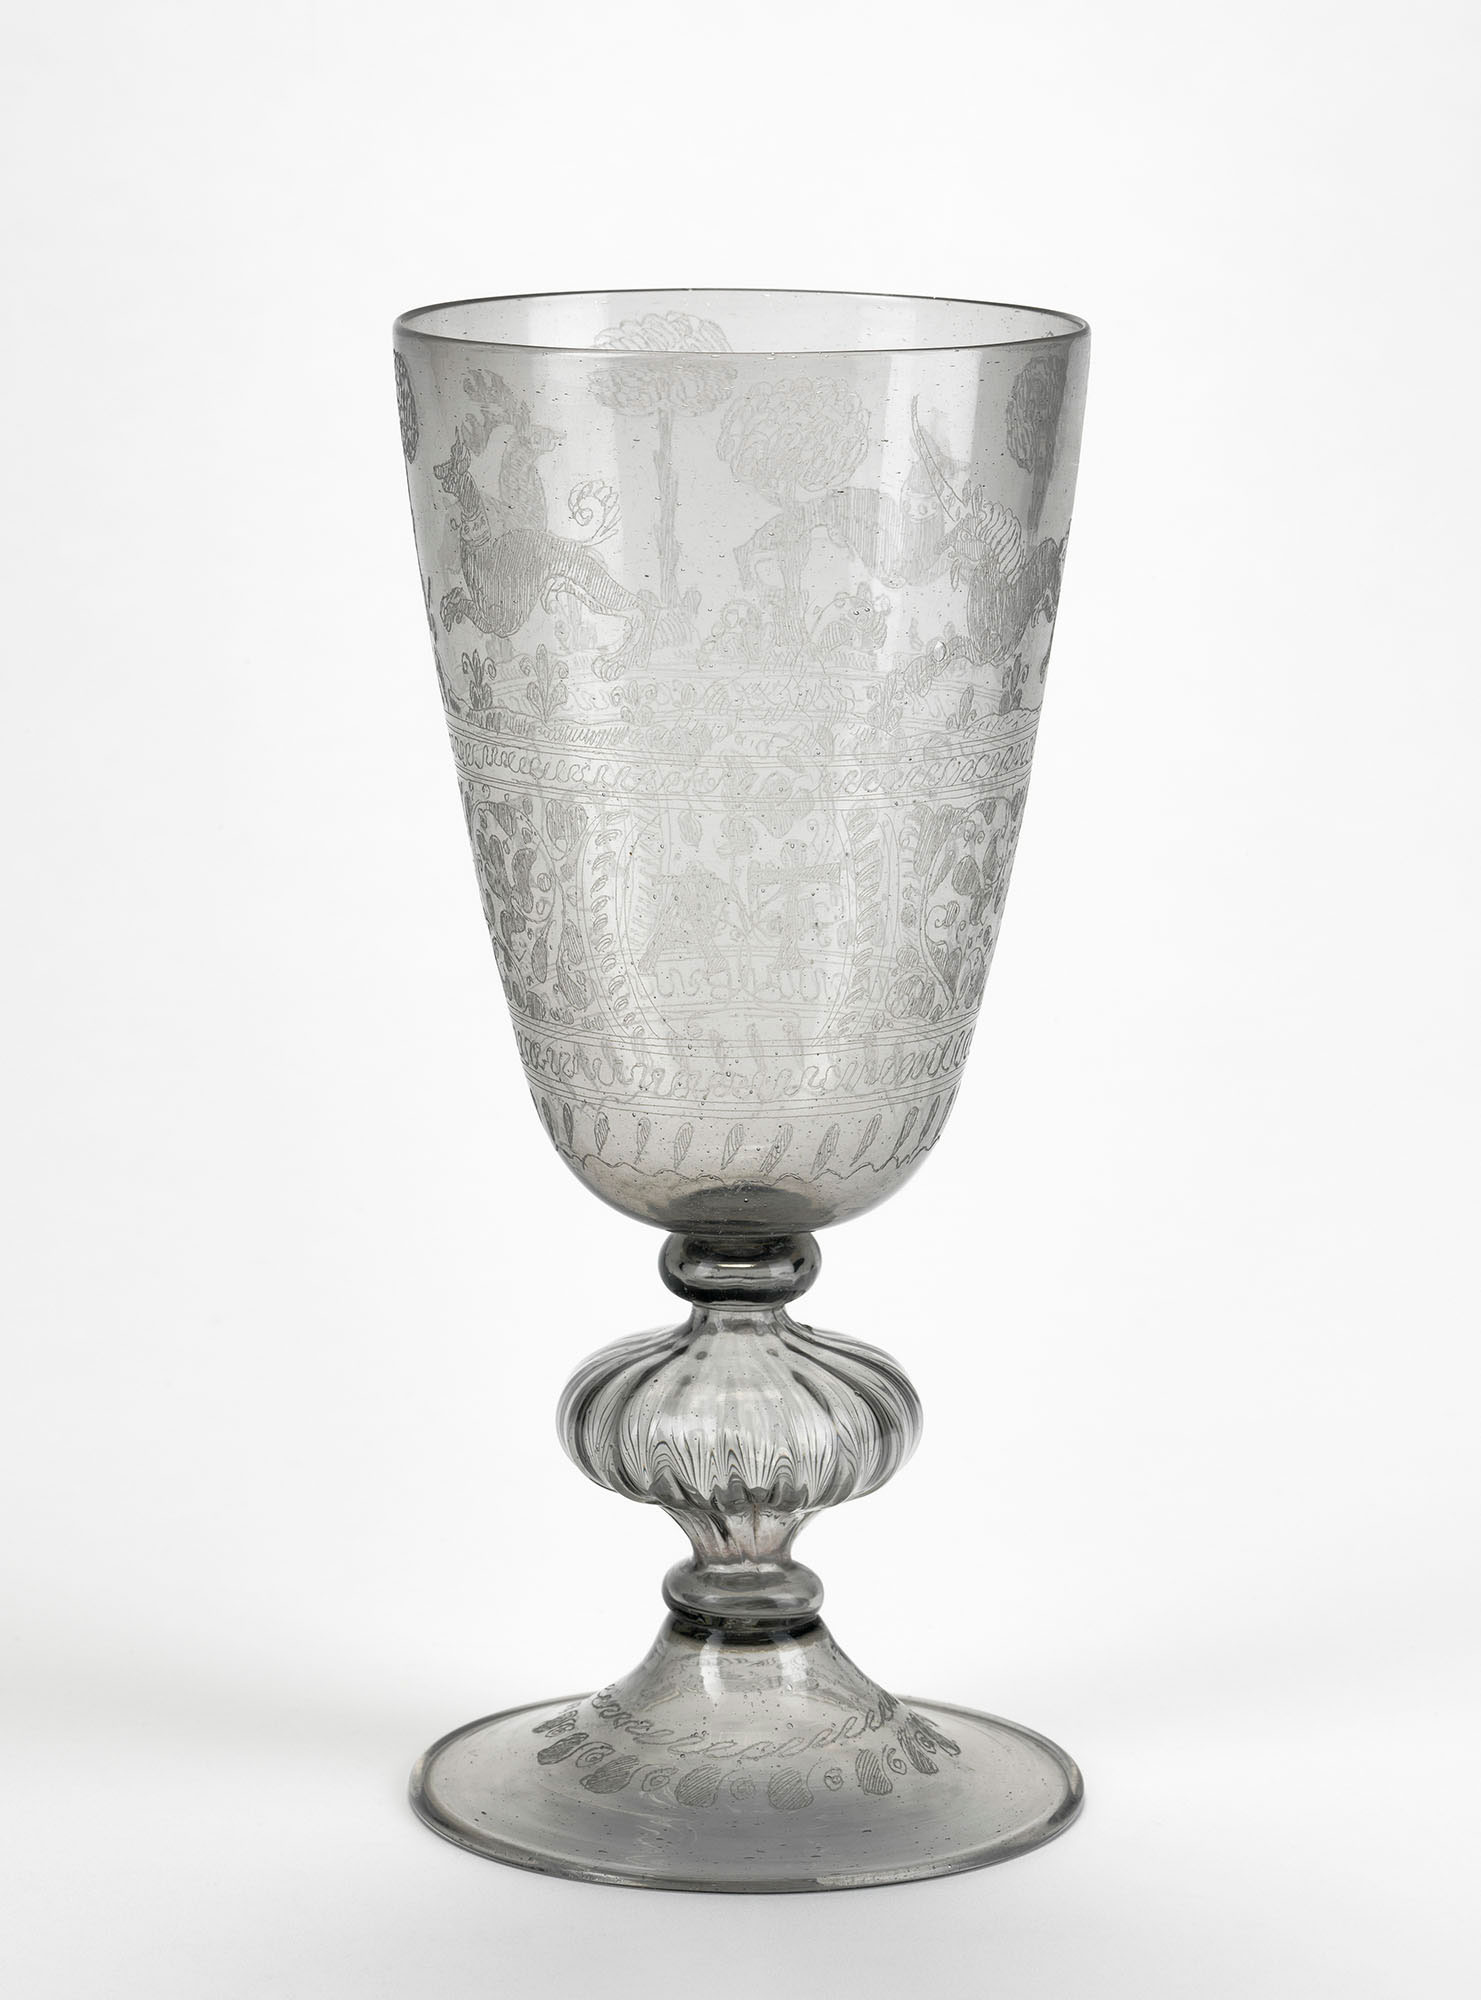 Clear glass goblet engraved with a stag, a unicorn, and hounds, and the owners' initials RT and AT entwined by lover's knots